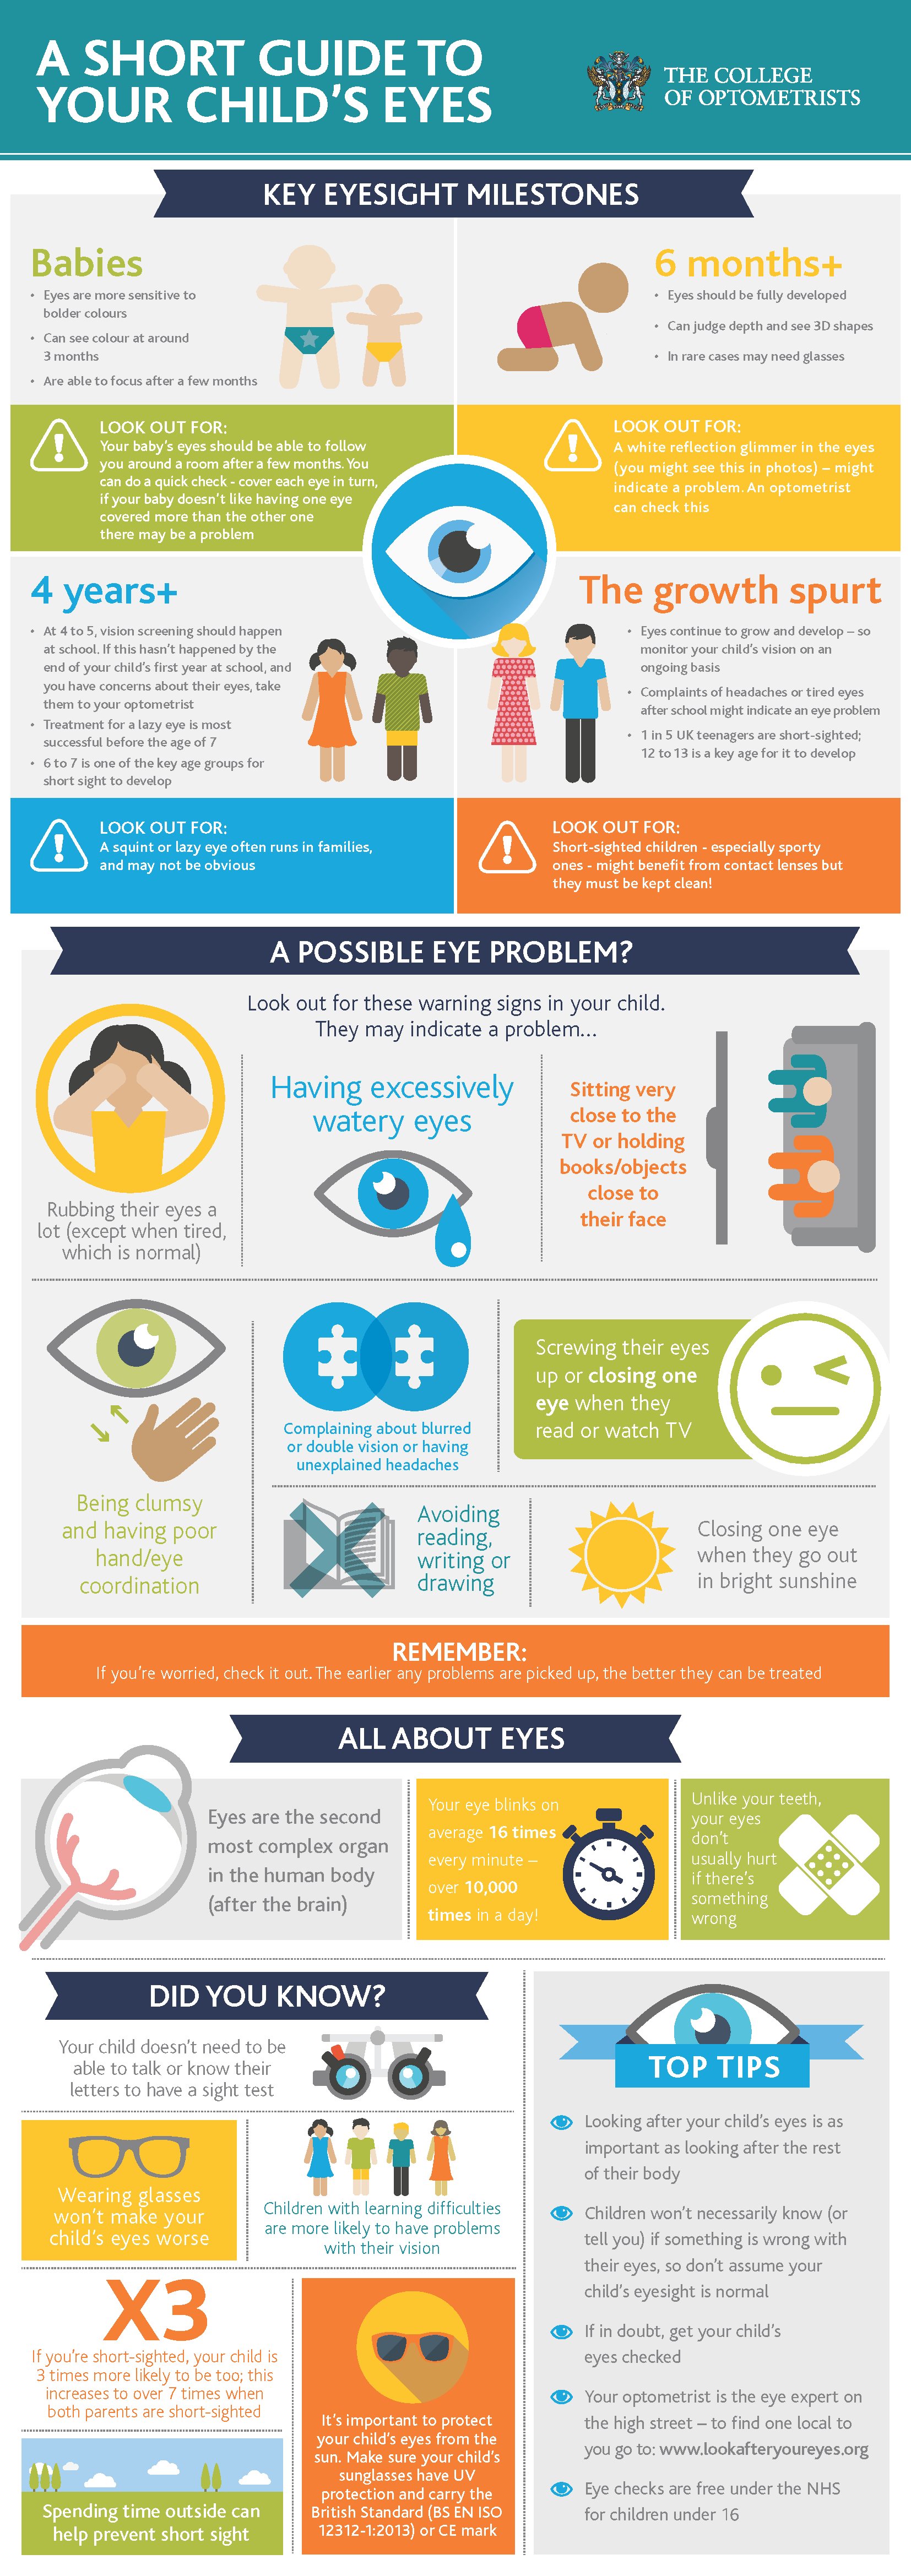 College of Optometrists infographic